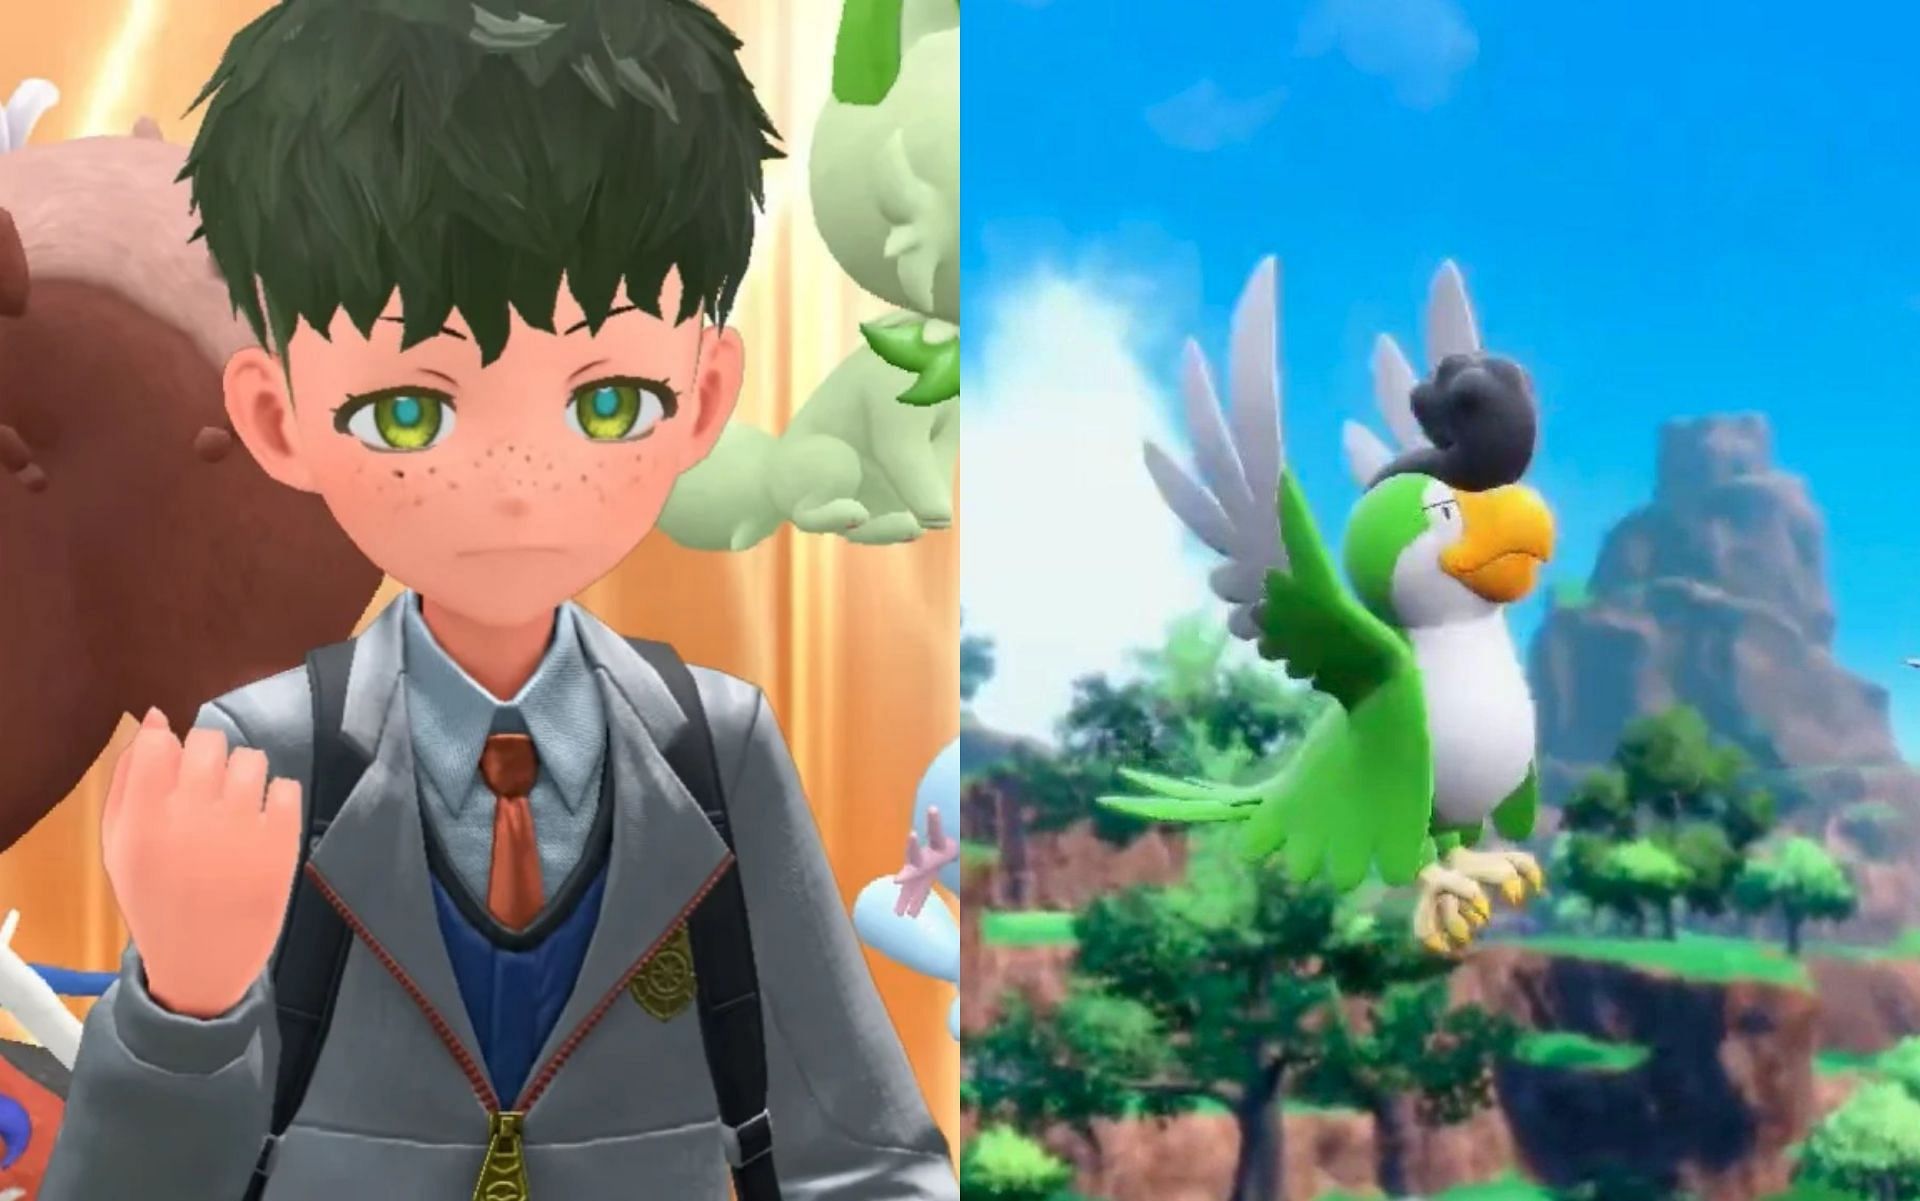 Another leak shows of a green parrot with a hairdo (Images via The Pokemon Company)